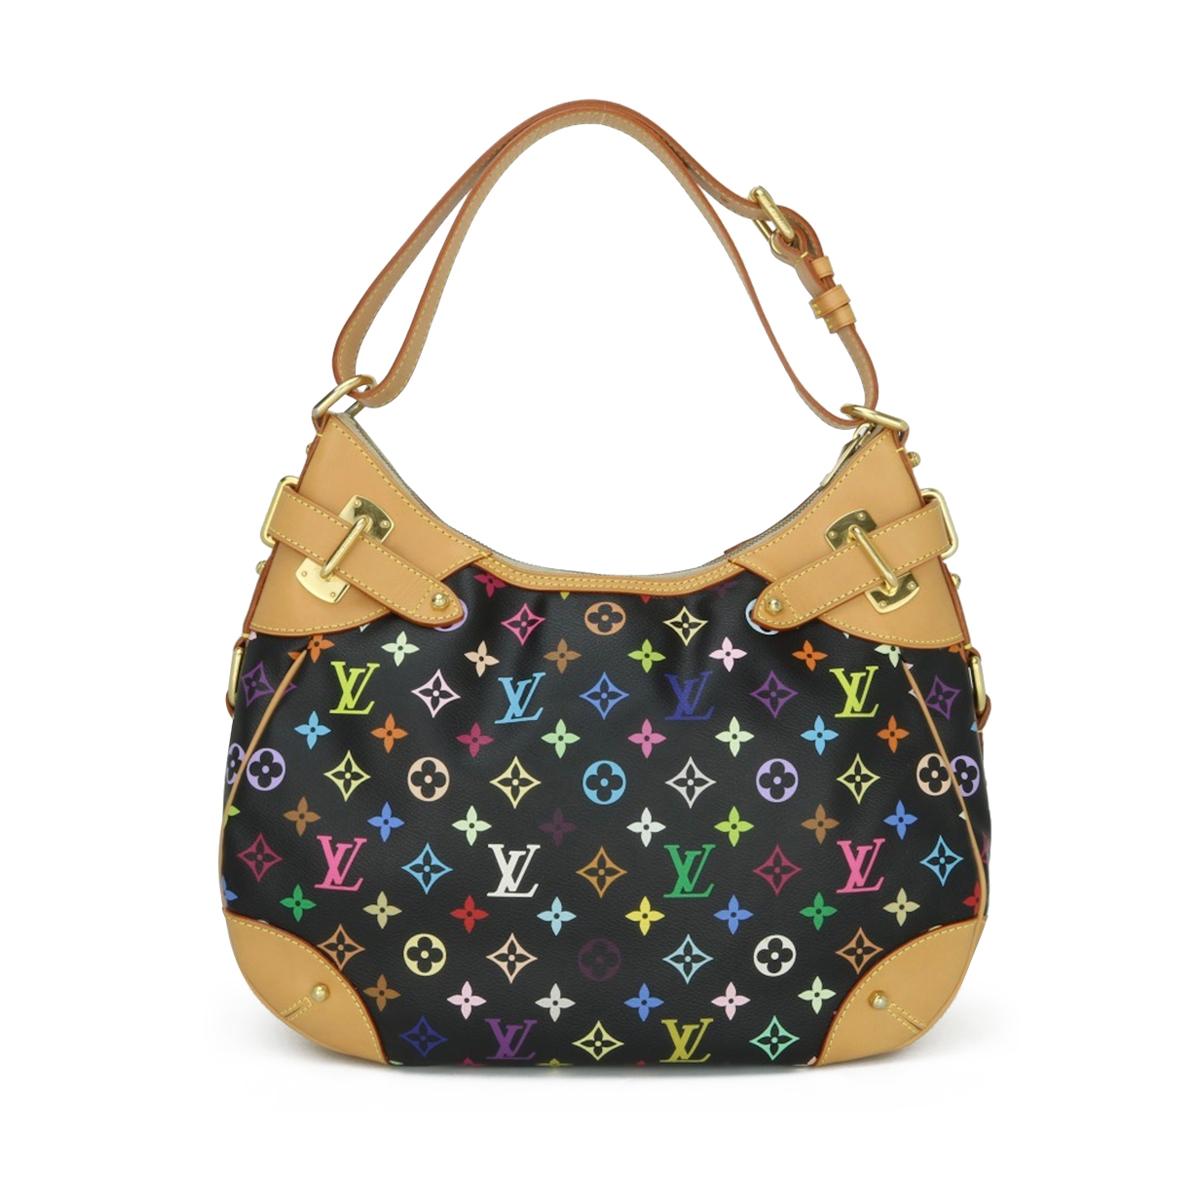 Louis Vuitton Greta Noir Shoulder Bag in Monogram Multicolore with Gold Hardware 2008.

This bag is in excellent condition.

Finding this particular style bag in excellent condition becomes extremely difficult these days since it is a limited